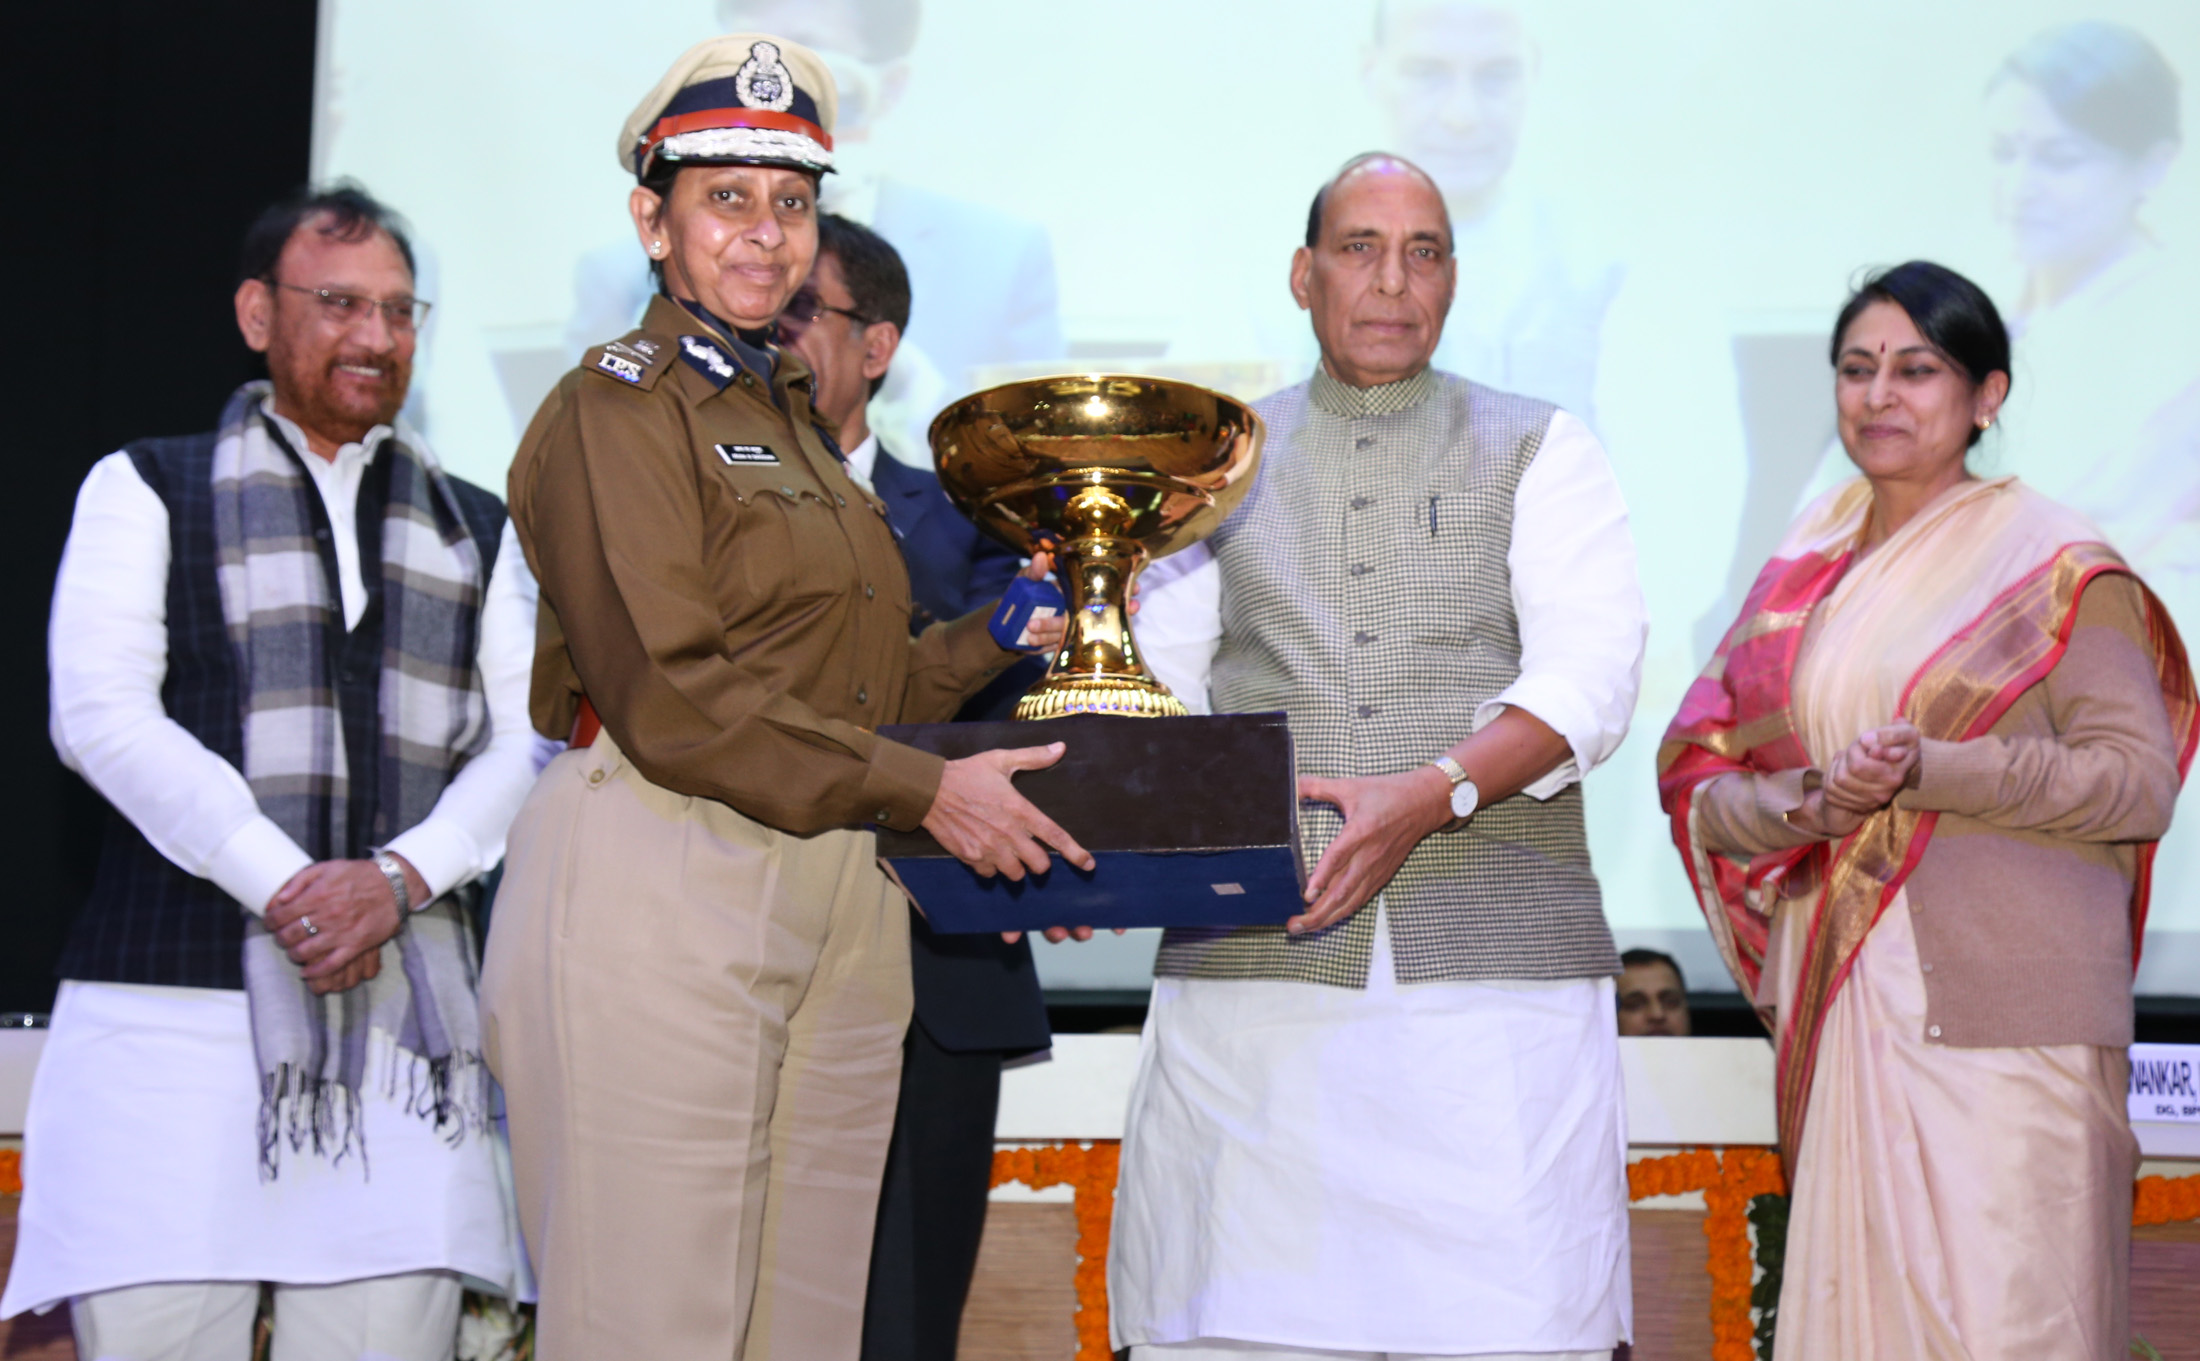 The Union Home Minister, Shri Rajnath Singh presenting a trophy instituted by the BPR&D, during his visit to the CDTS campus, in Ghaziabad on December 16, 2016.